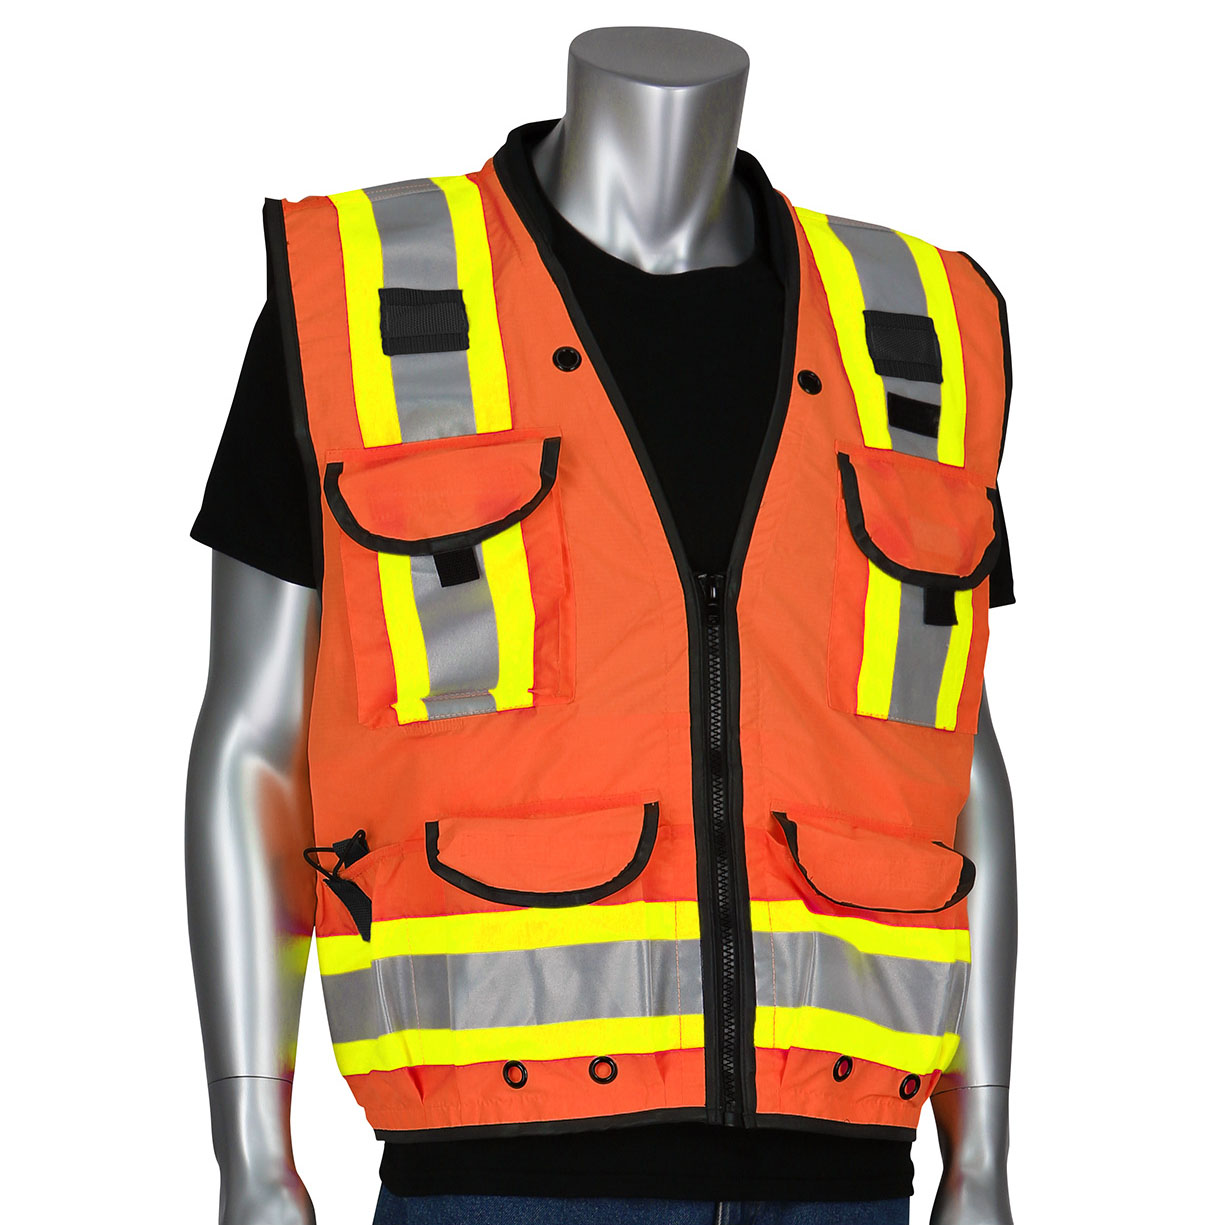 PIP 302-0900 Type R Class 2 Two-Tone Ripstop Surveyor Safety Vest ...